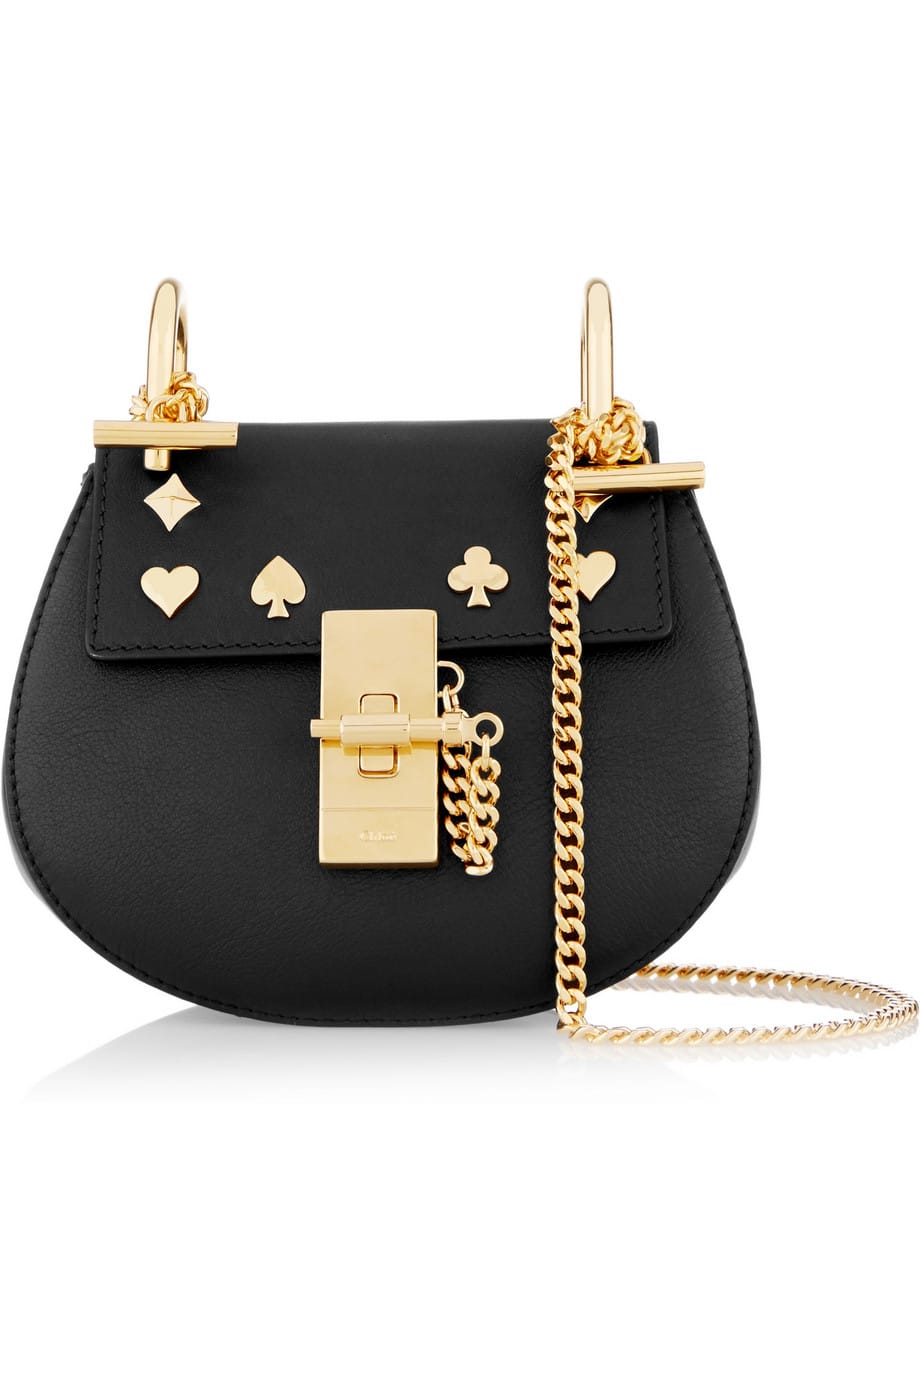 Limited Edition Chloe Bags Exclusive For Net-A-Porter - Spotted 